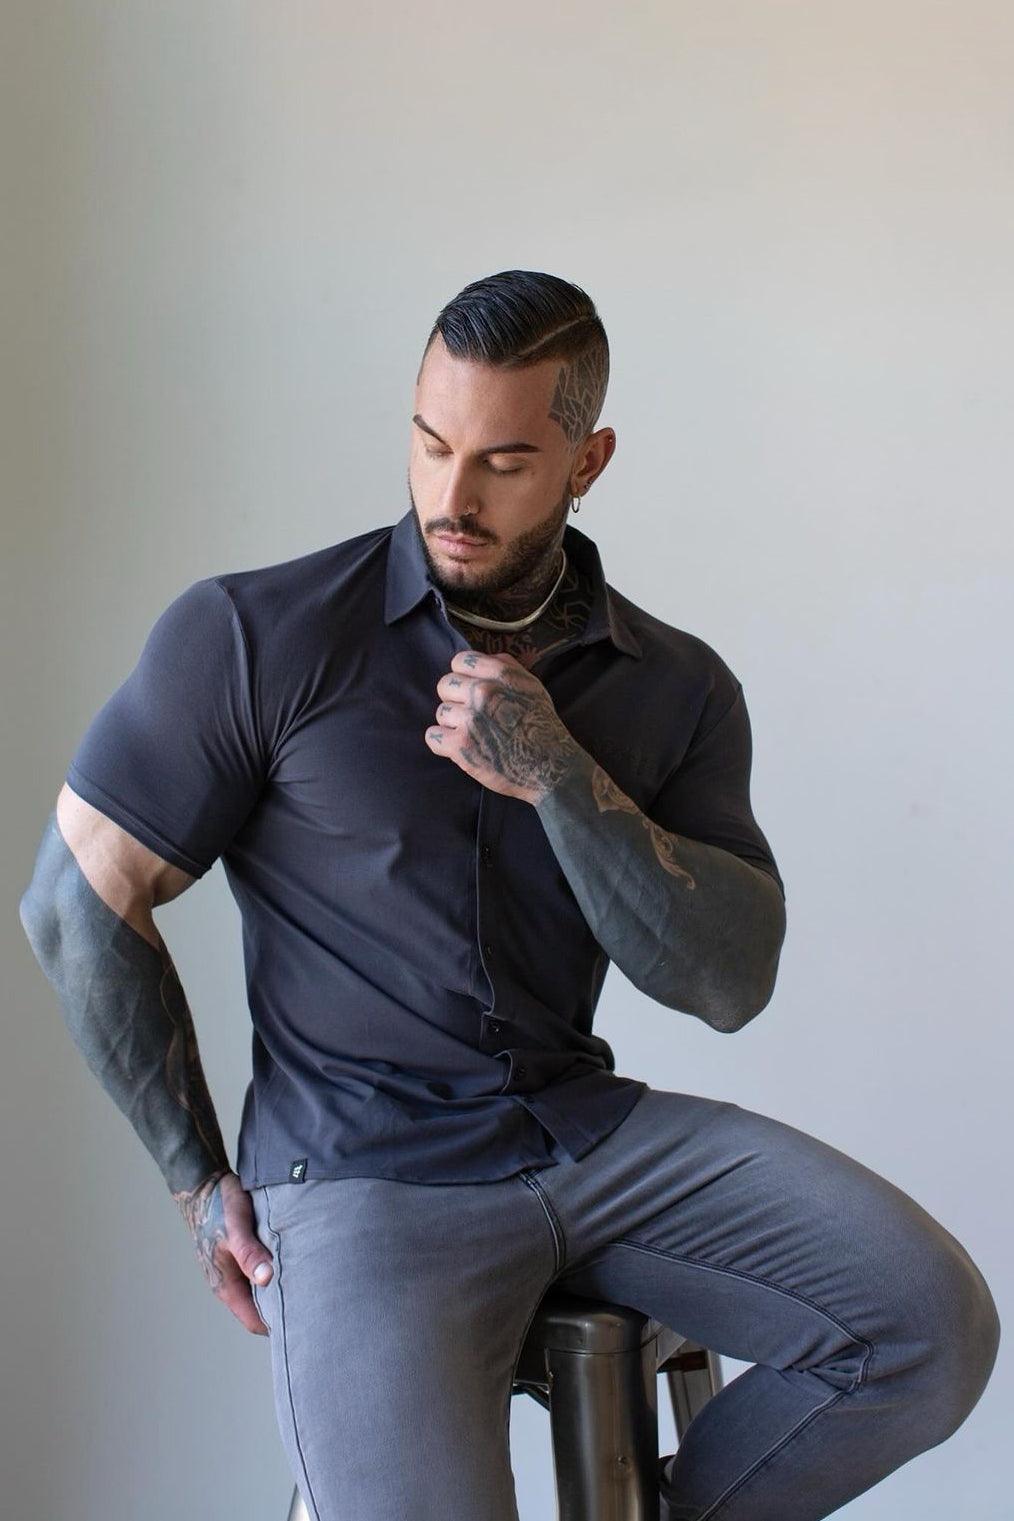 Button-up Muscle T-Shirt - Navy - Jed North Canada